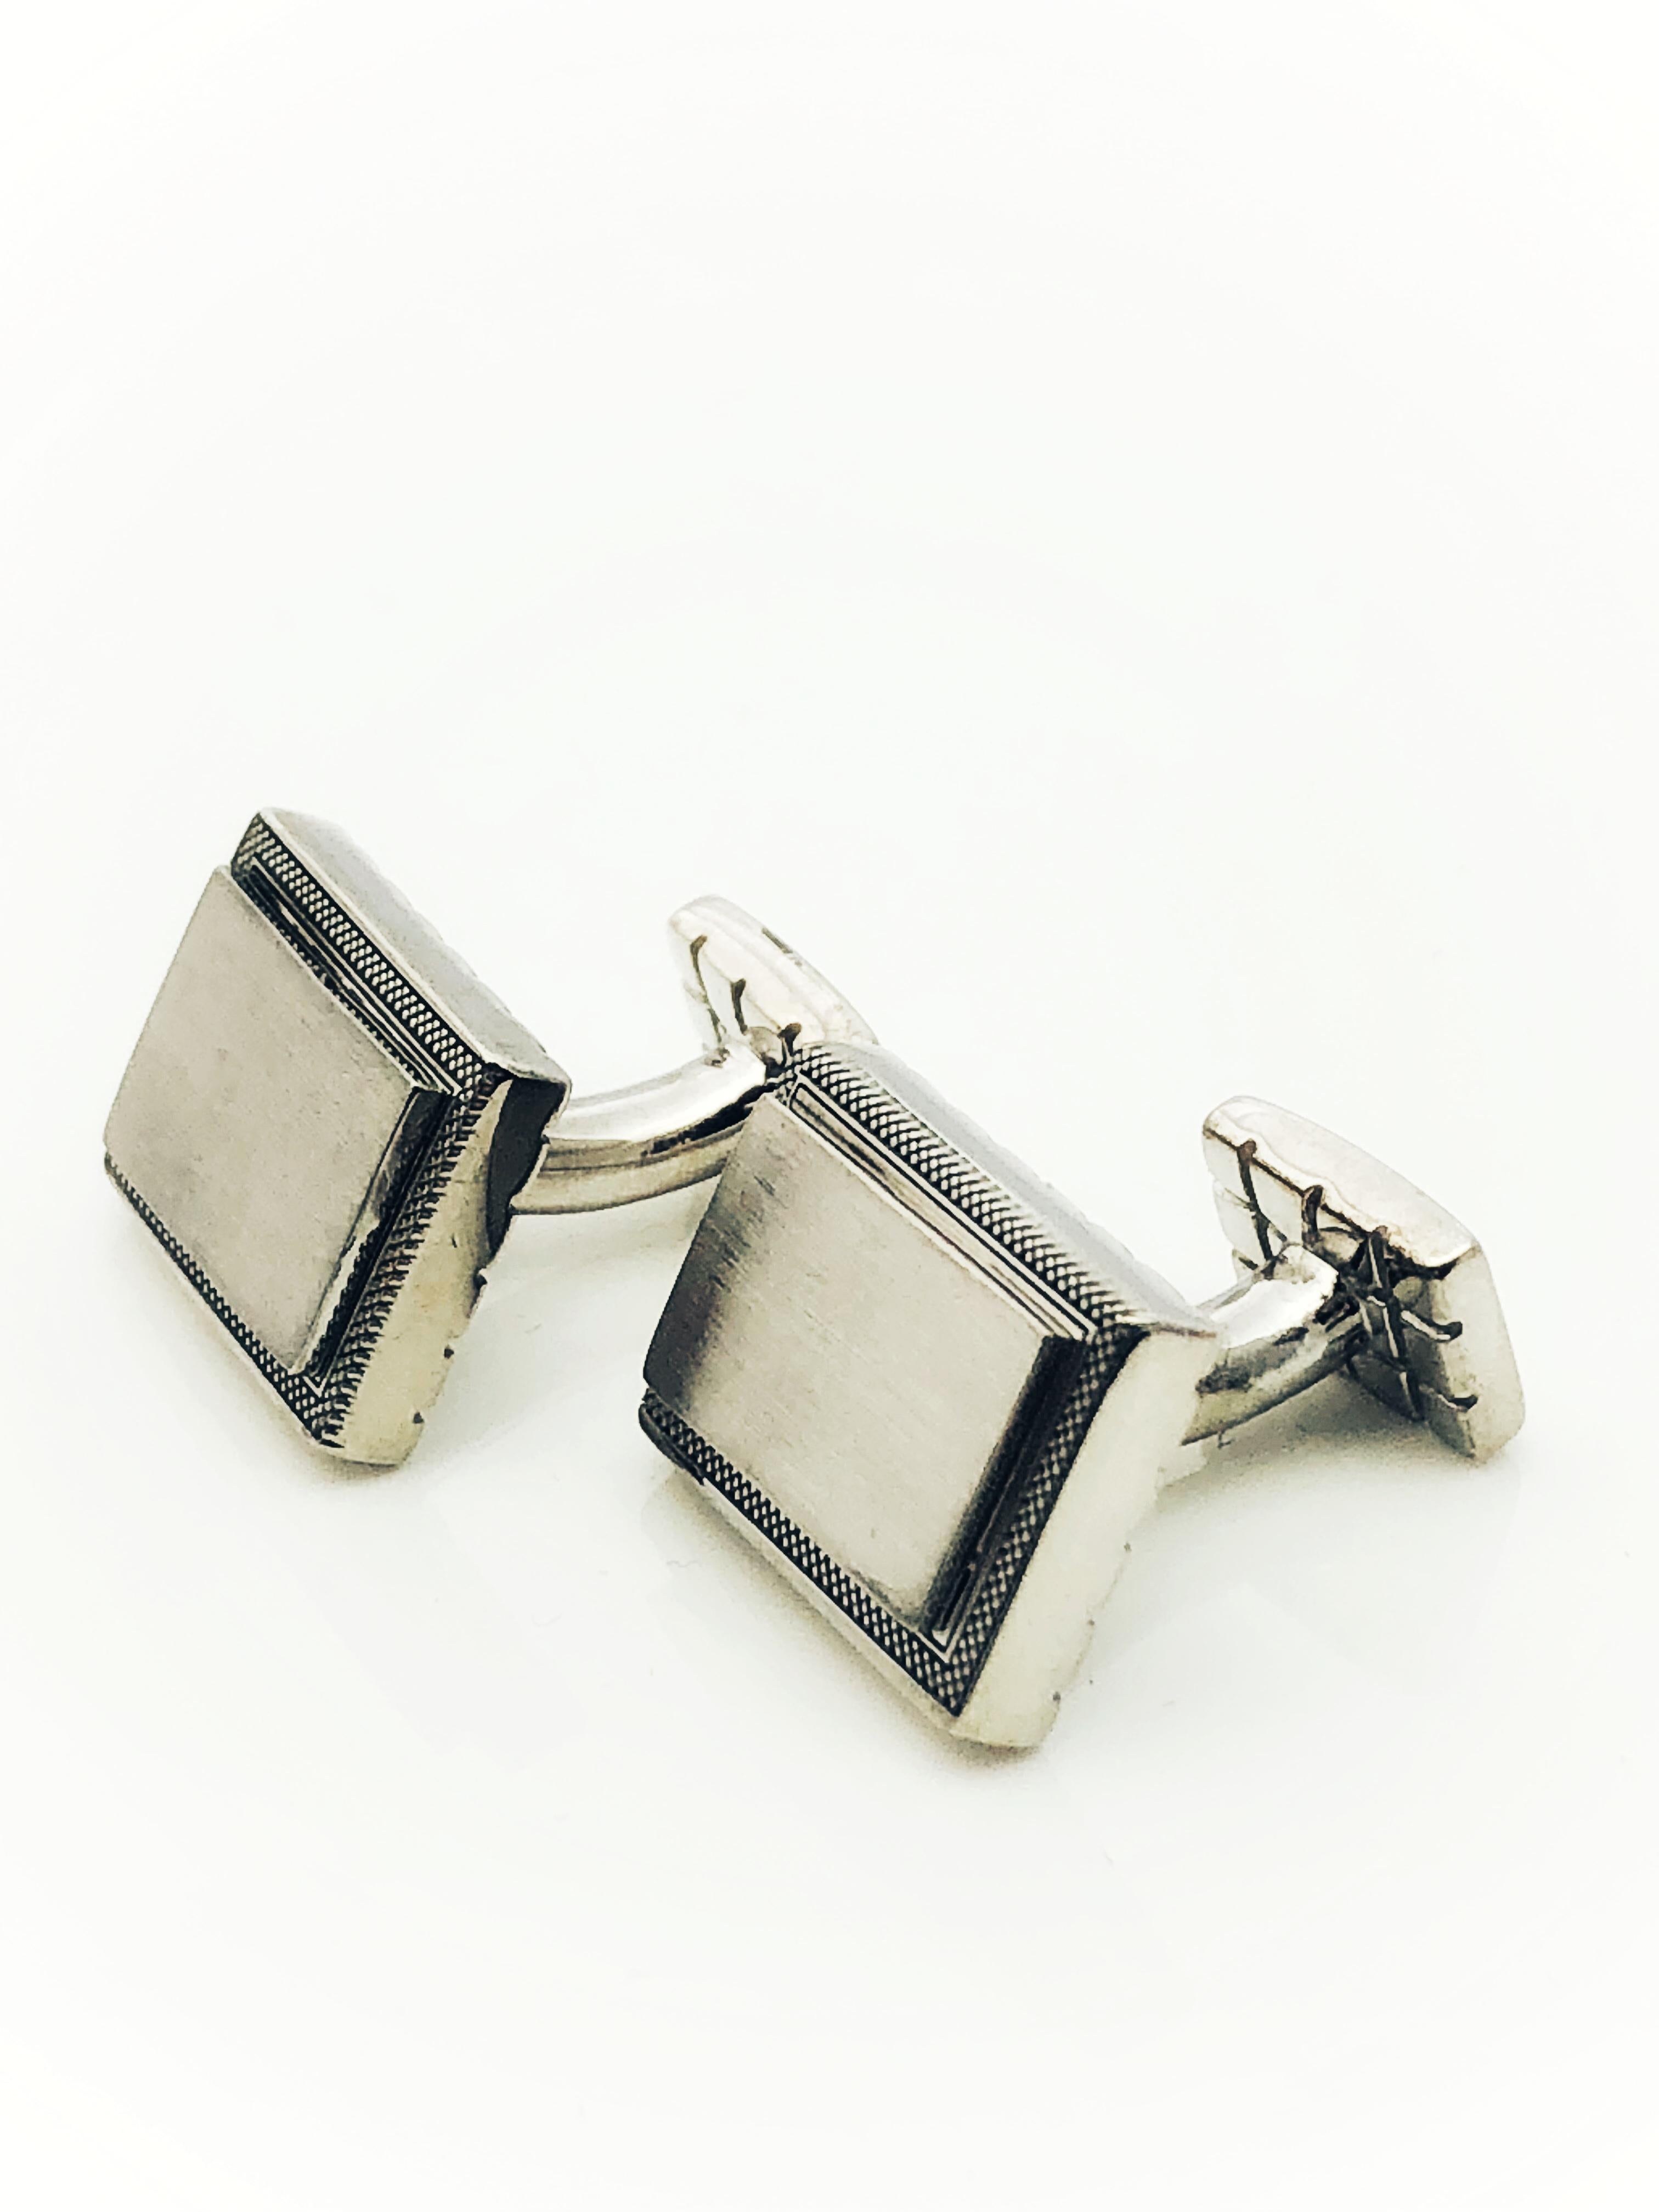 This set of cufflinks would be a wonderful gift for that special someone in your life! Made in Sterling silver, they measure 5/8 inch by 1/2 inch and weigh 26.3 grams. The cufflinks are engrave able. The portion to be engraved is a flat matte finish